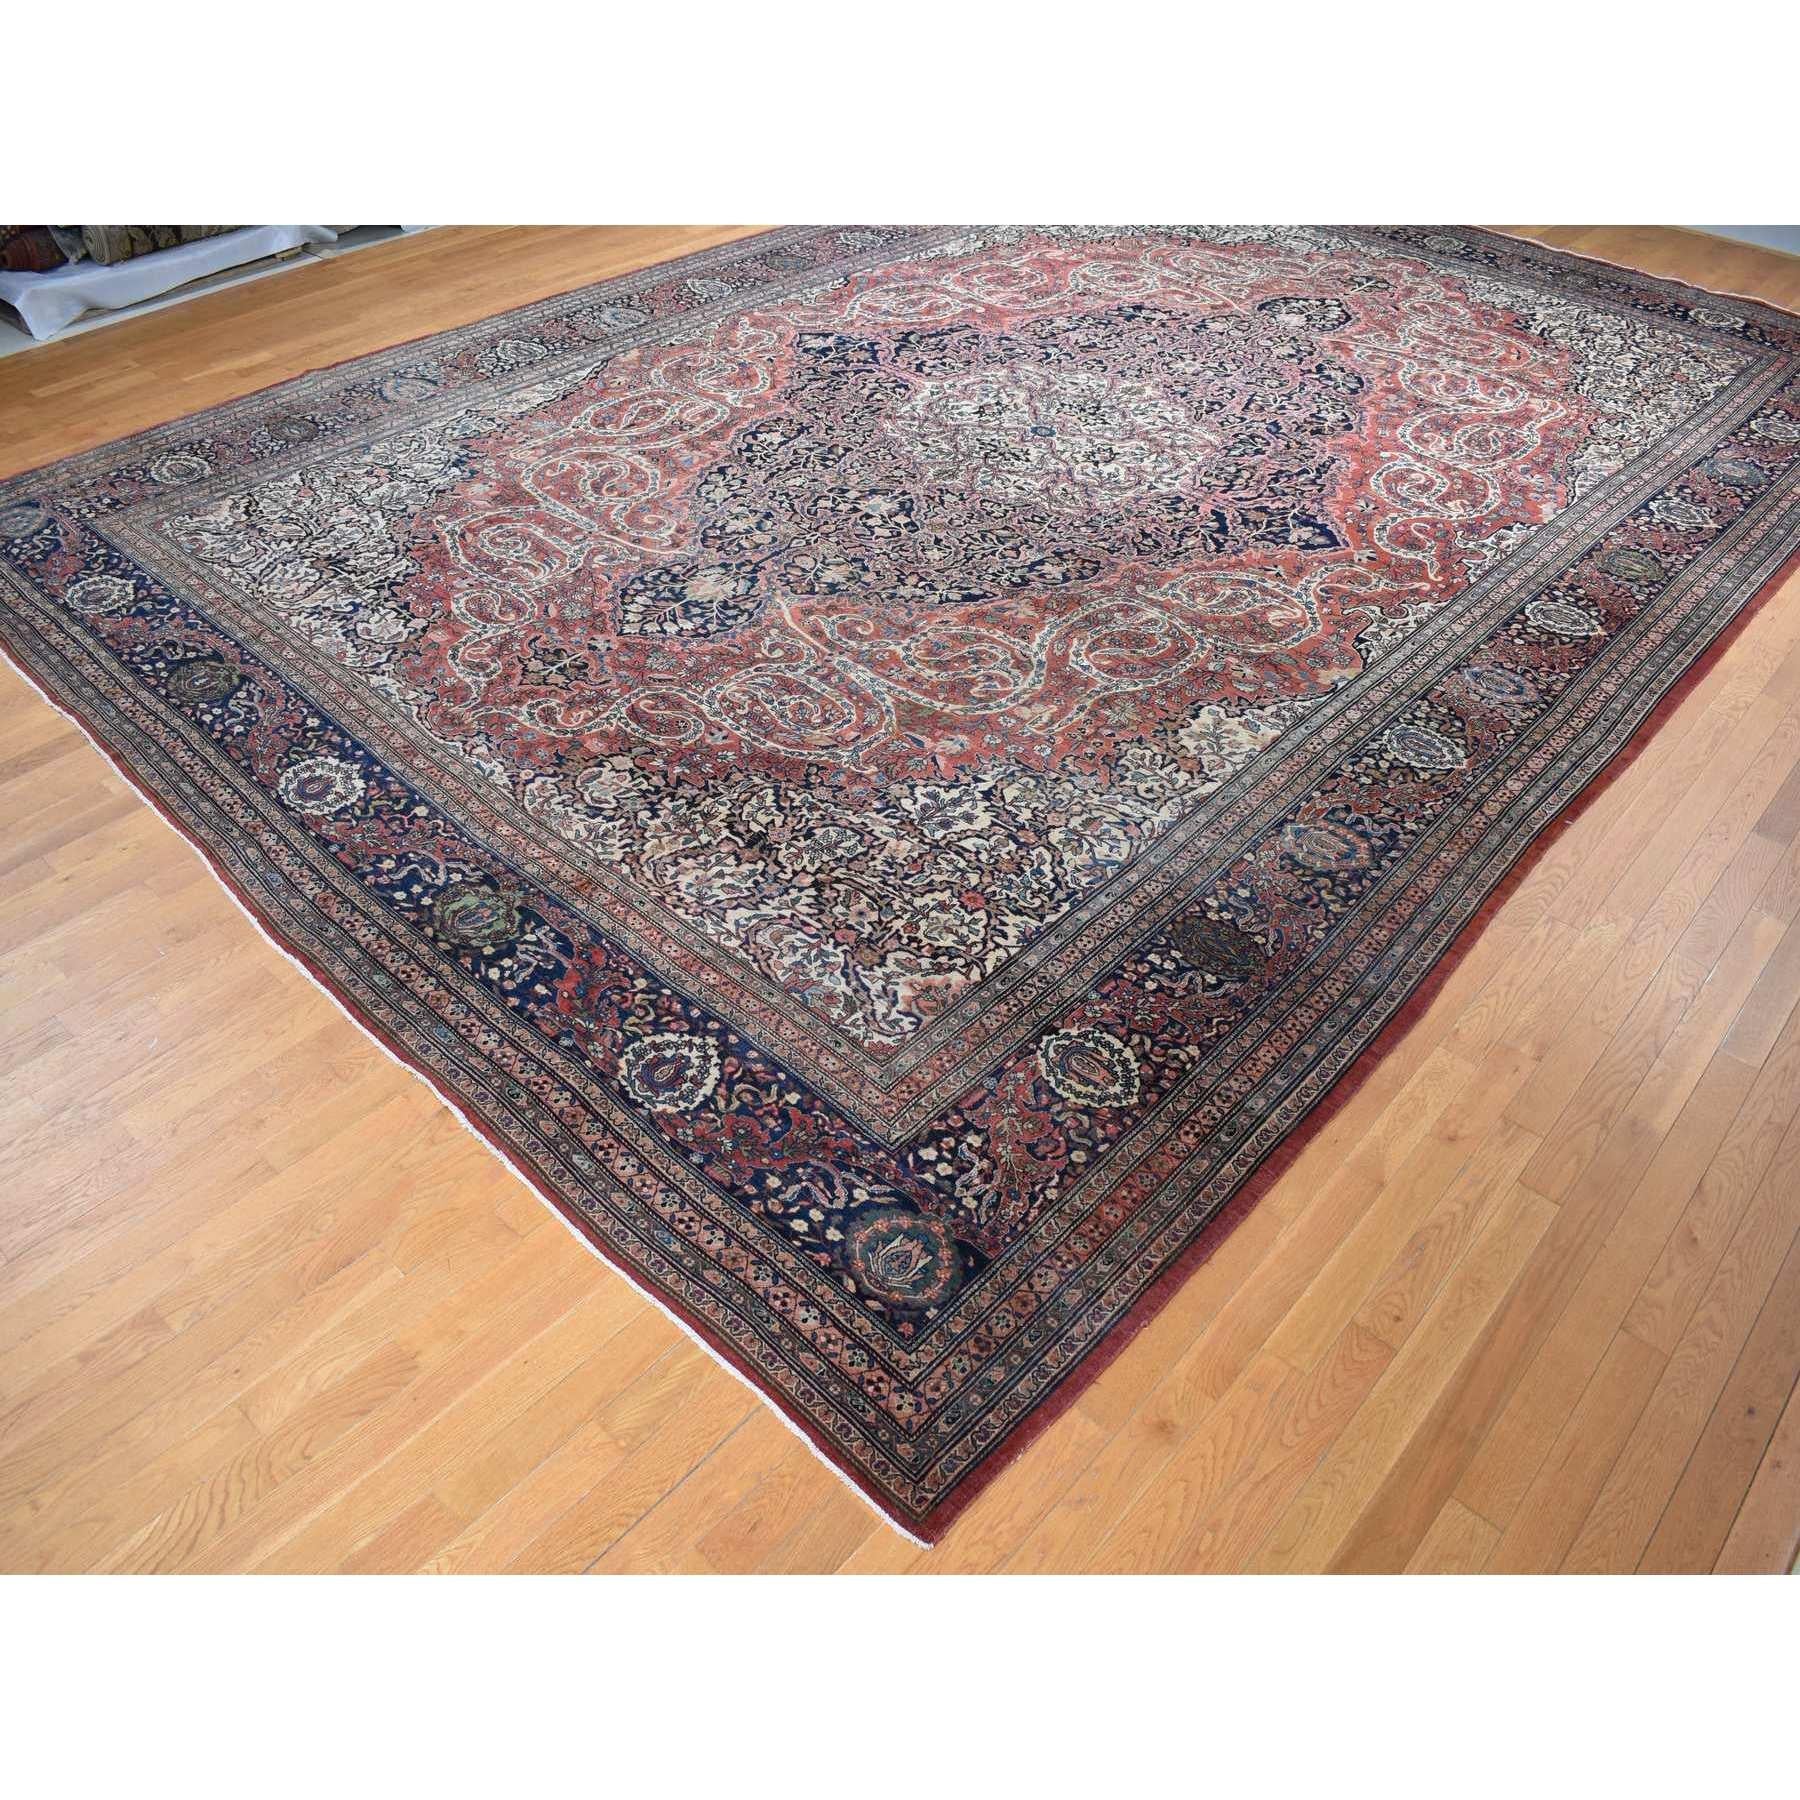 Medieval Red XL Antique Persian Fereghan Sarouk Even Wear Hand Knotted Pure Wool Rug For Sale